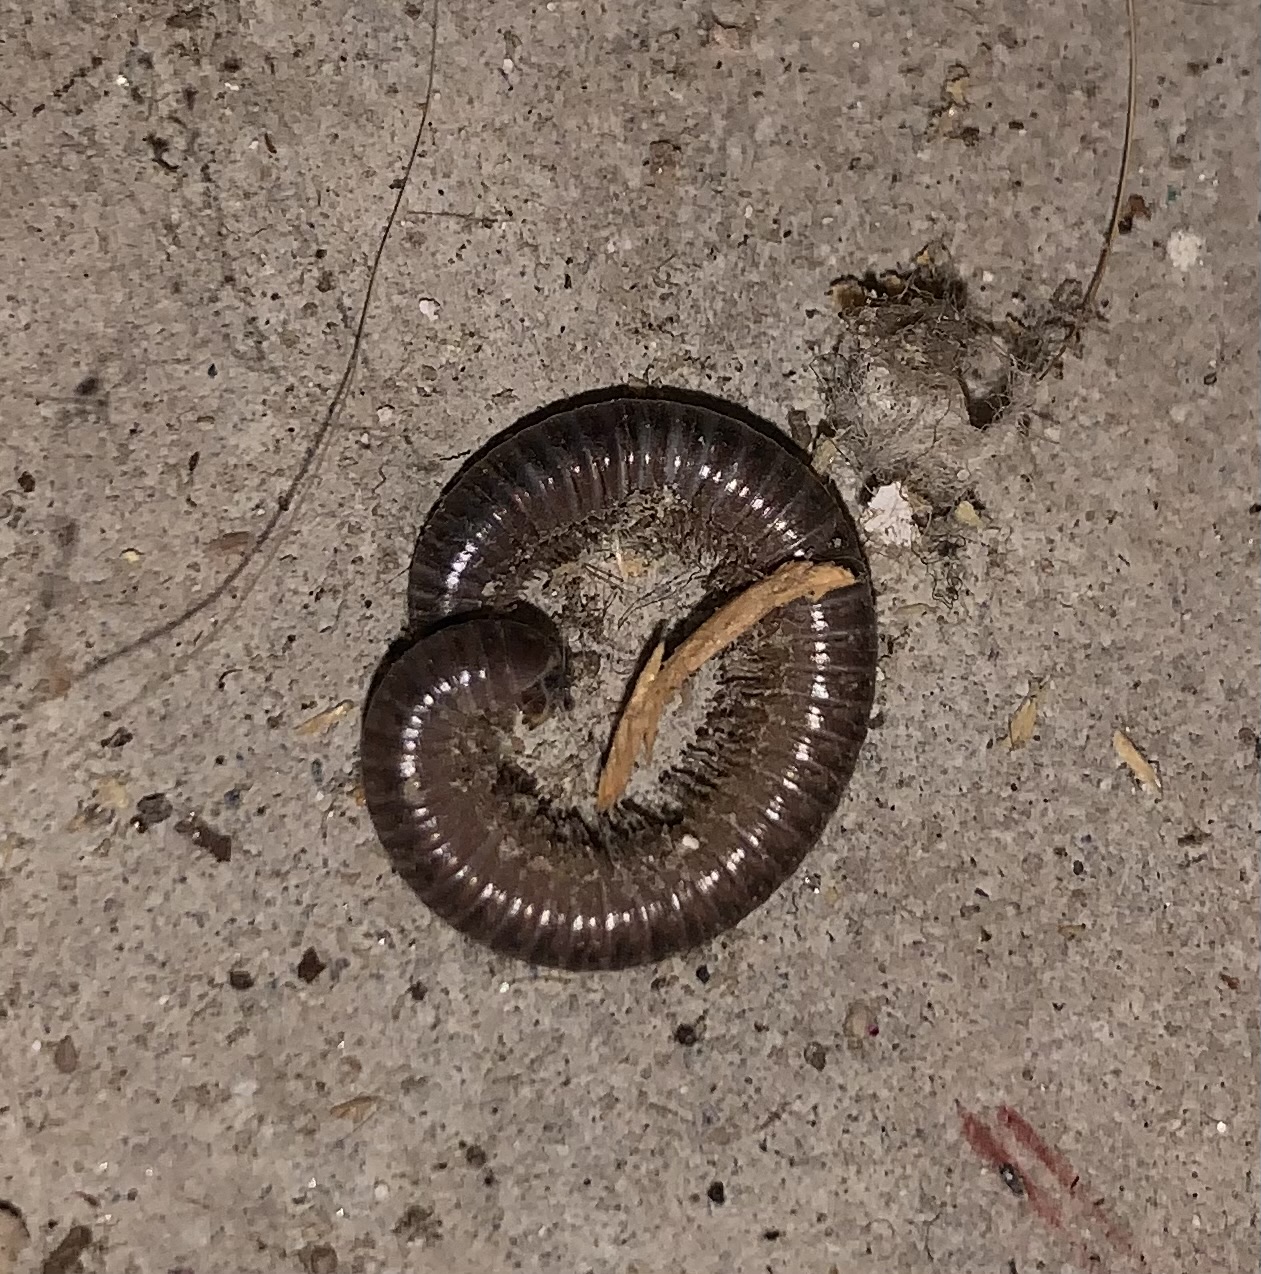 A tightly curled, wormlike millipede lies expired on a concrete floor.